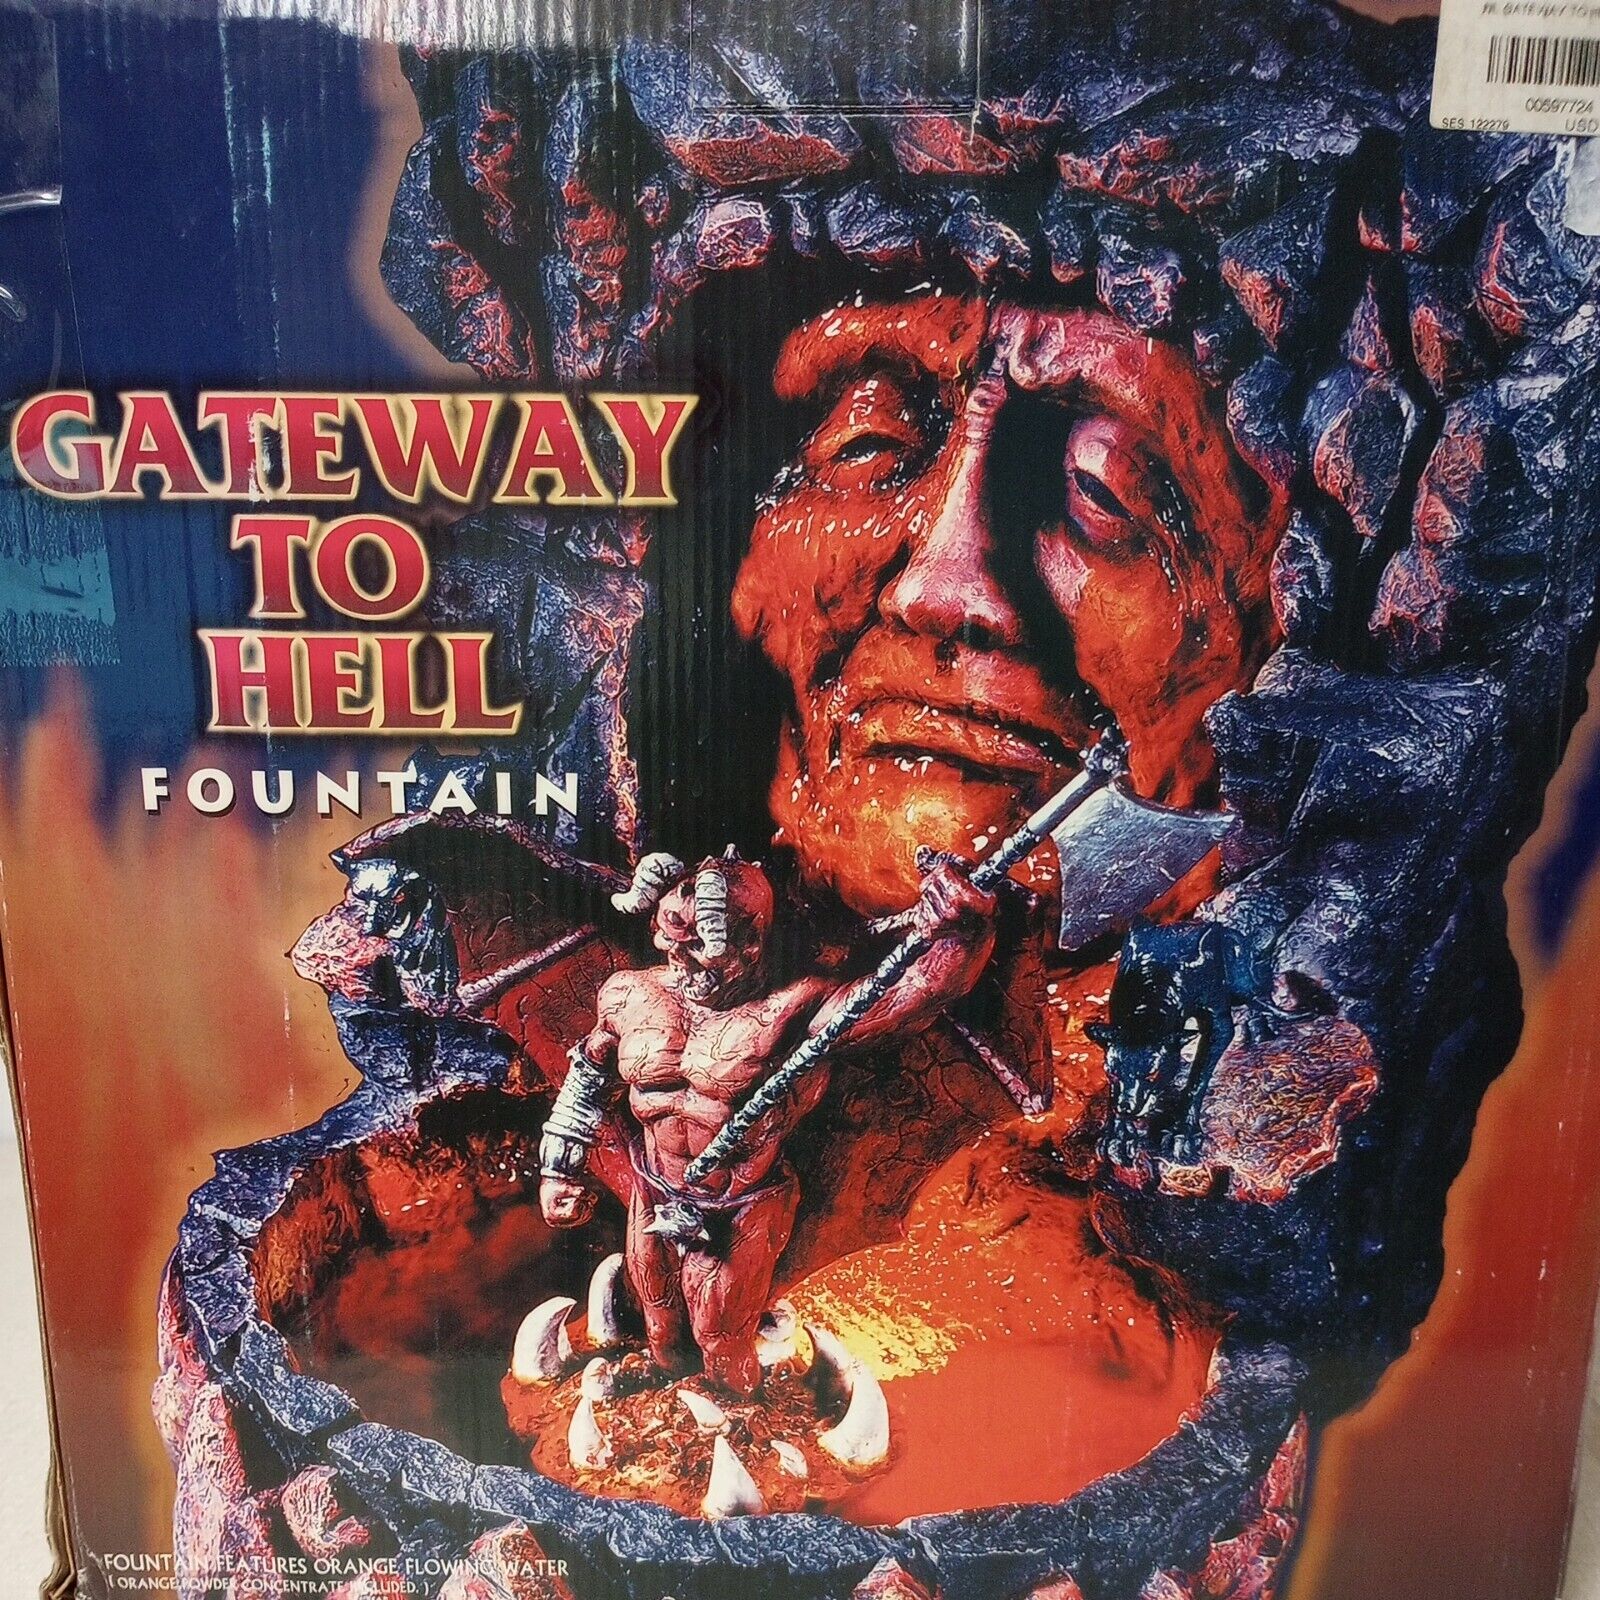 Rare New in Box Gateway to Hell Fountain From Spencer's Gifts Exclusive 1999